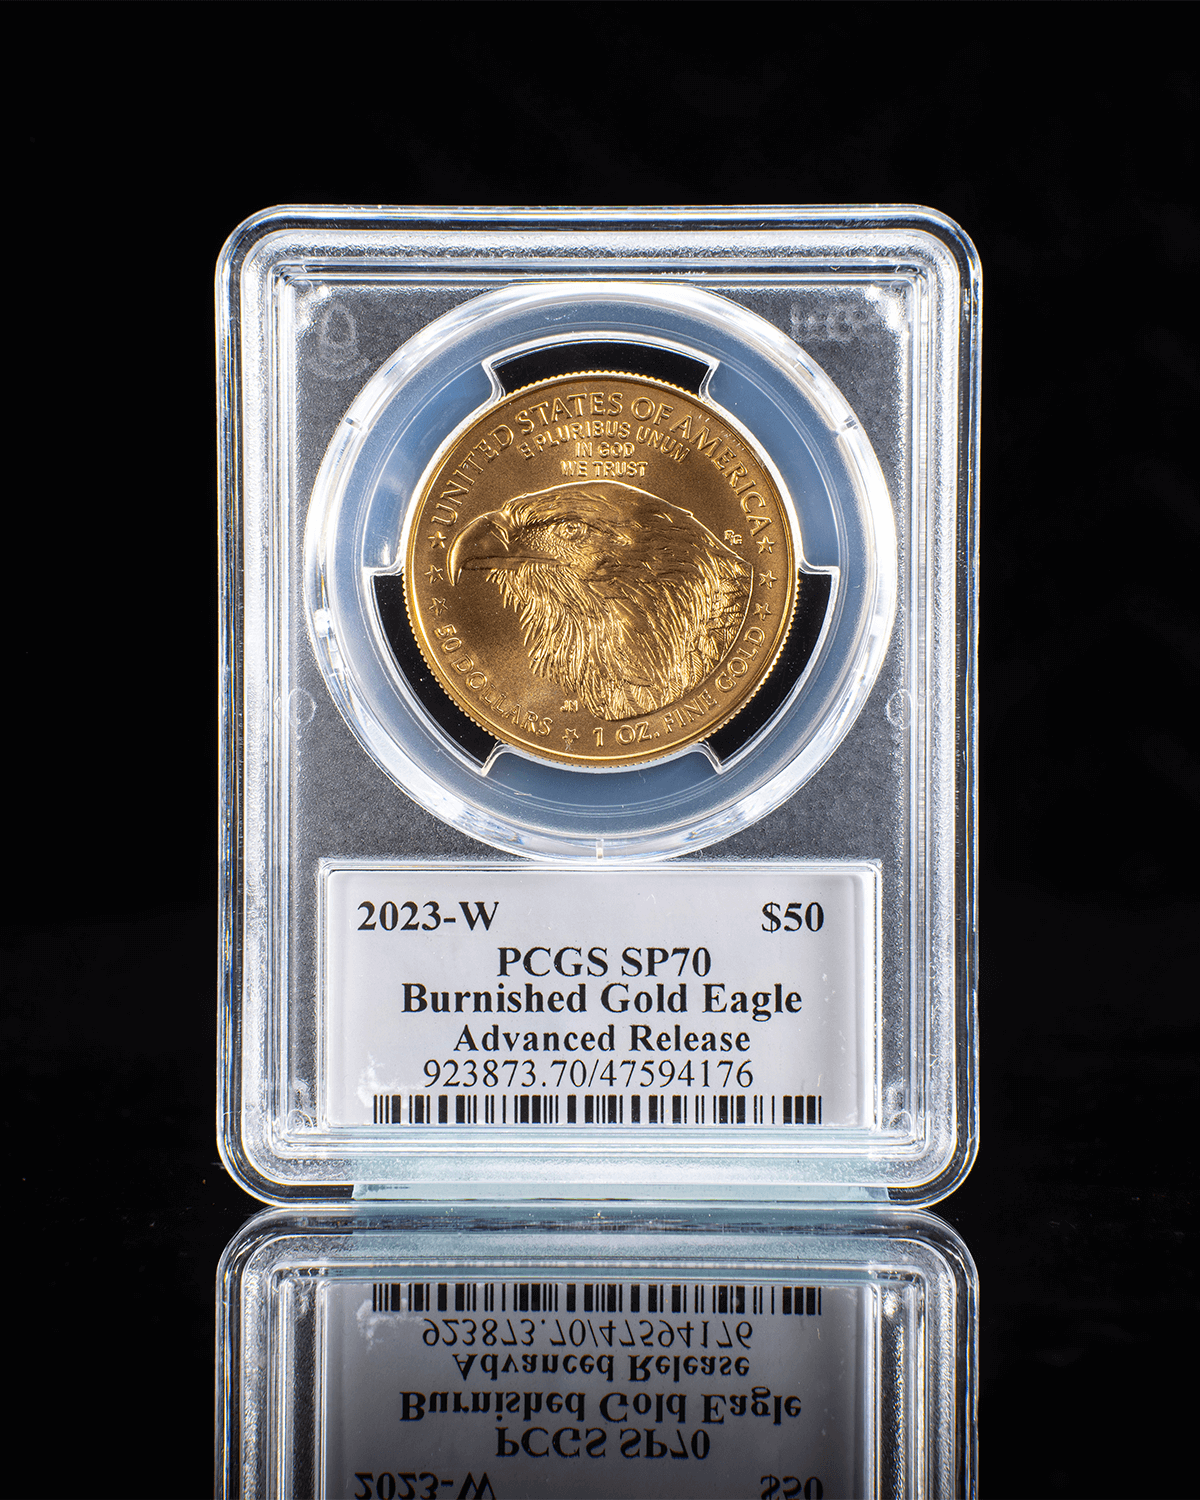 Gold Coin | $50 Burnished Gold Eagle | 2023 | Advanced Release